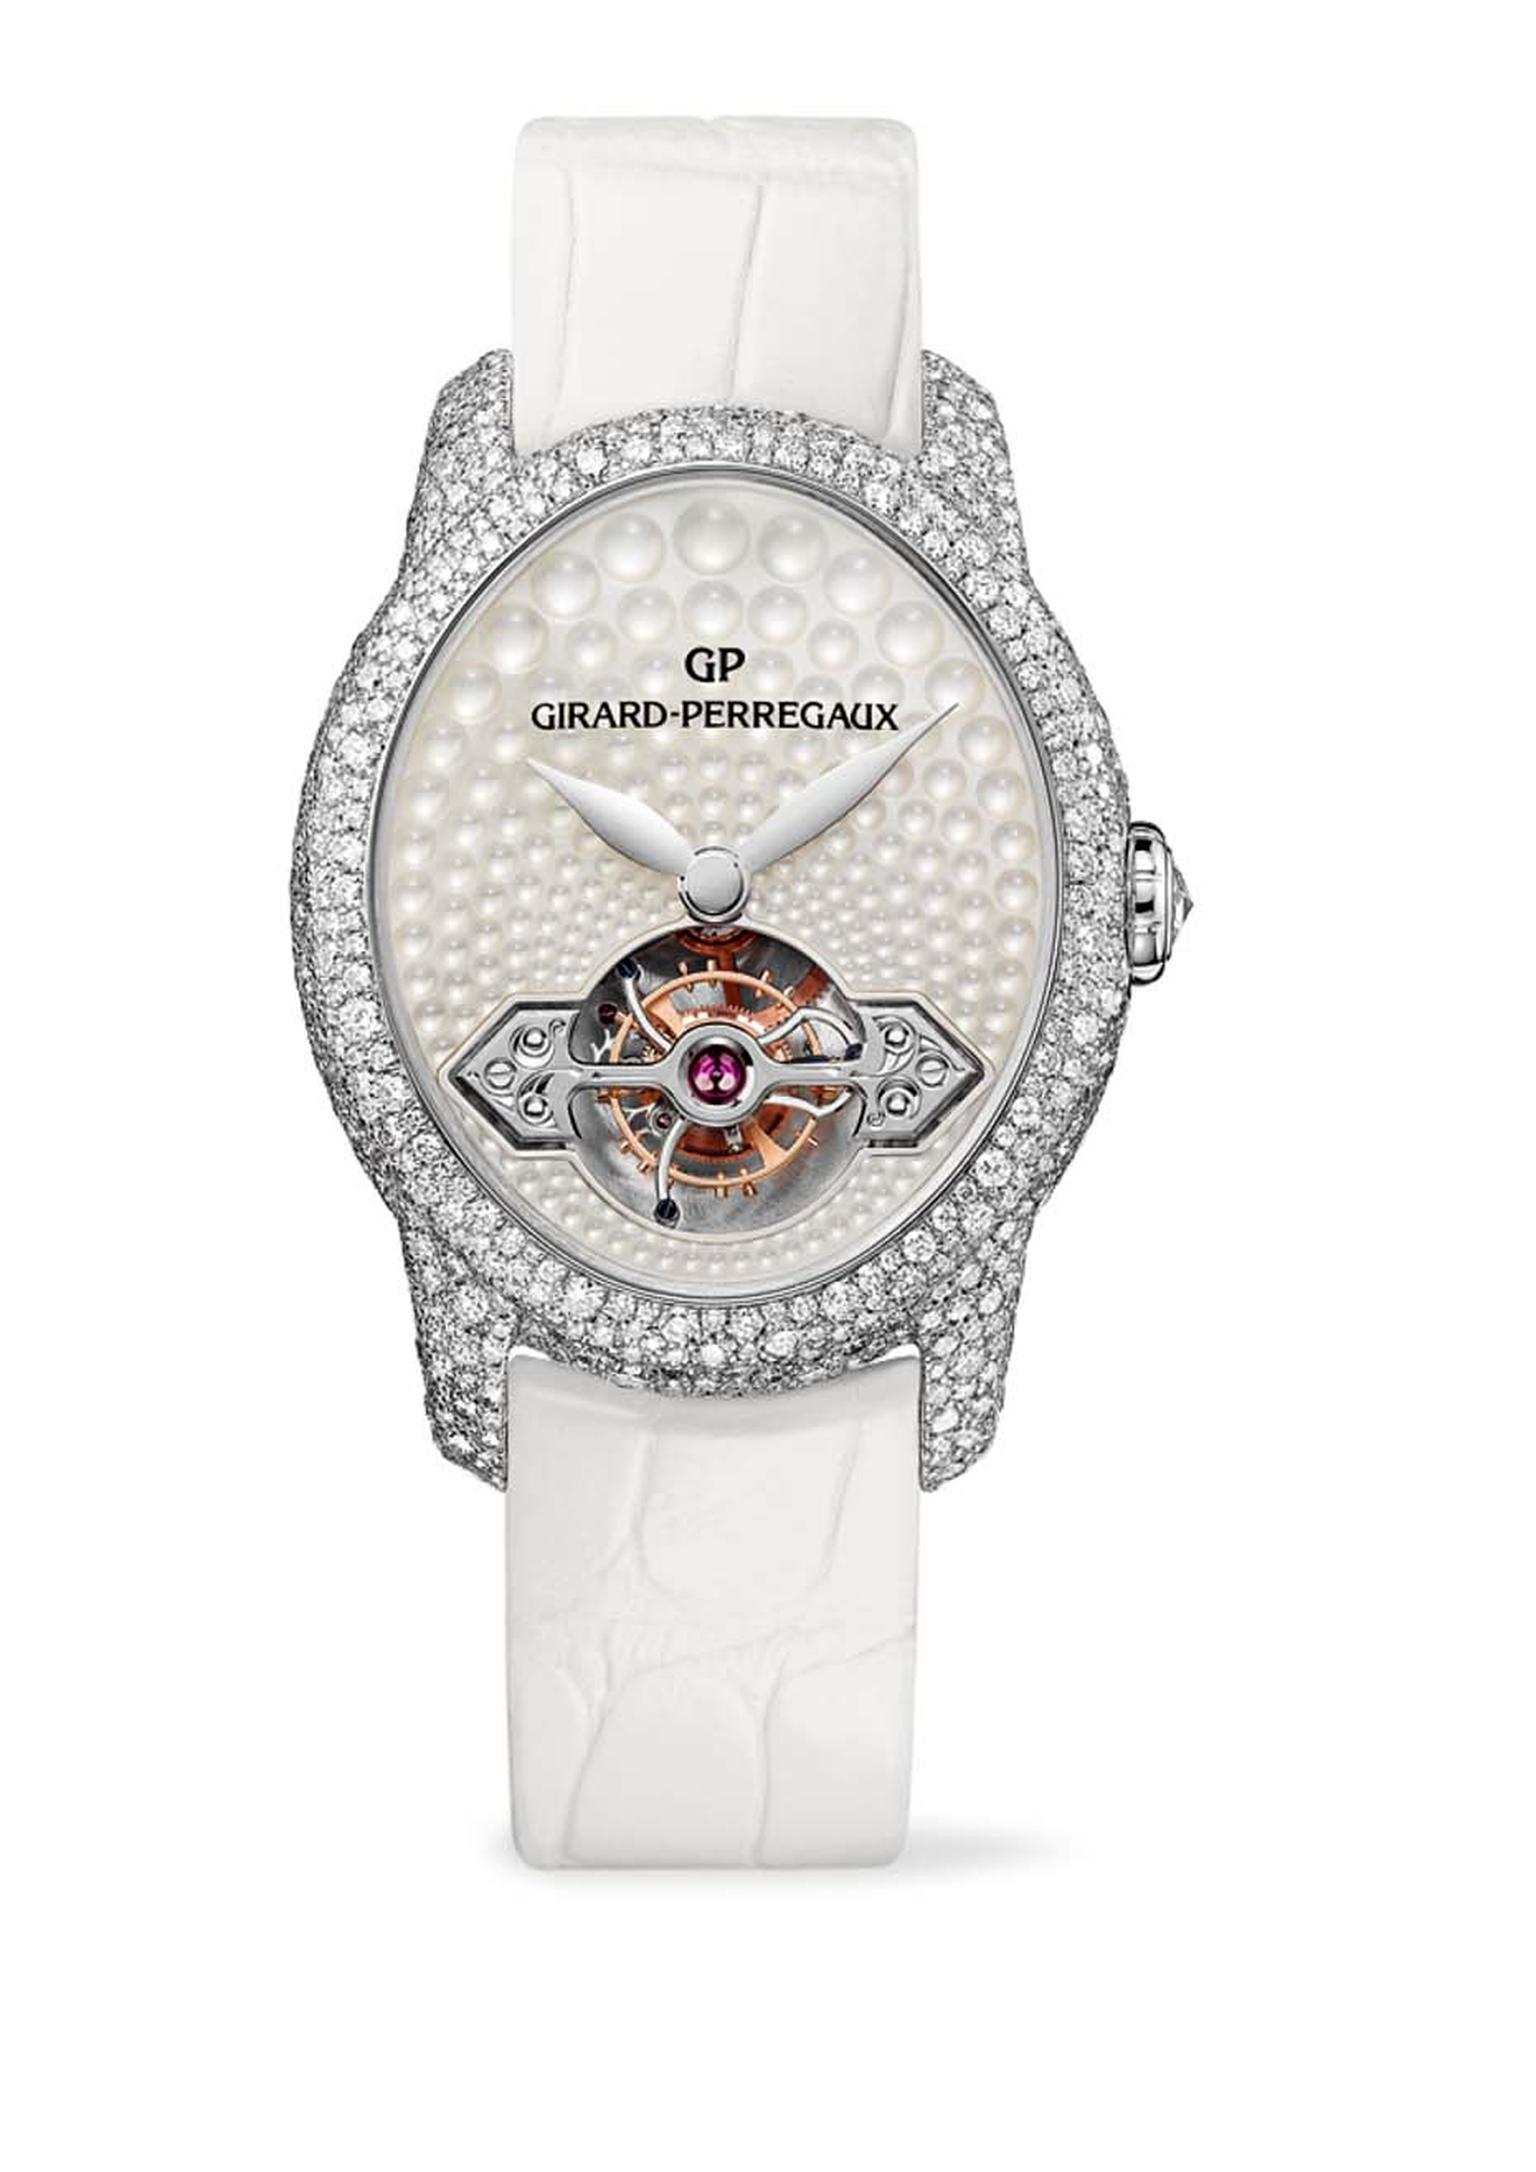 Girard-Perregaux Cat’s Eye Jewellery watch glitters with over 1,000 snow-set diamonds on the white gold case, which houses a unique mother-of-pearl dial with light-reflecting bubbles across its entire surface.